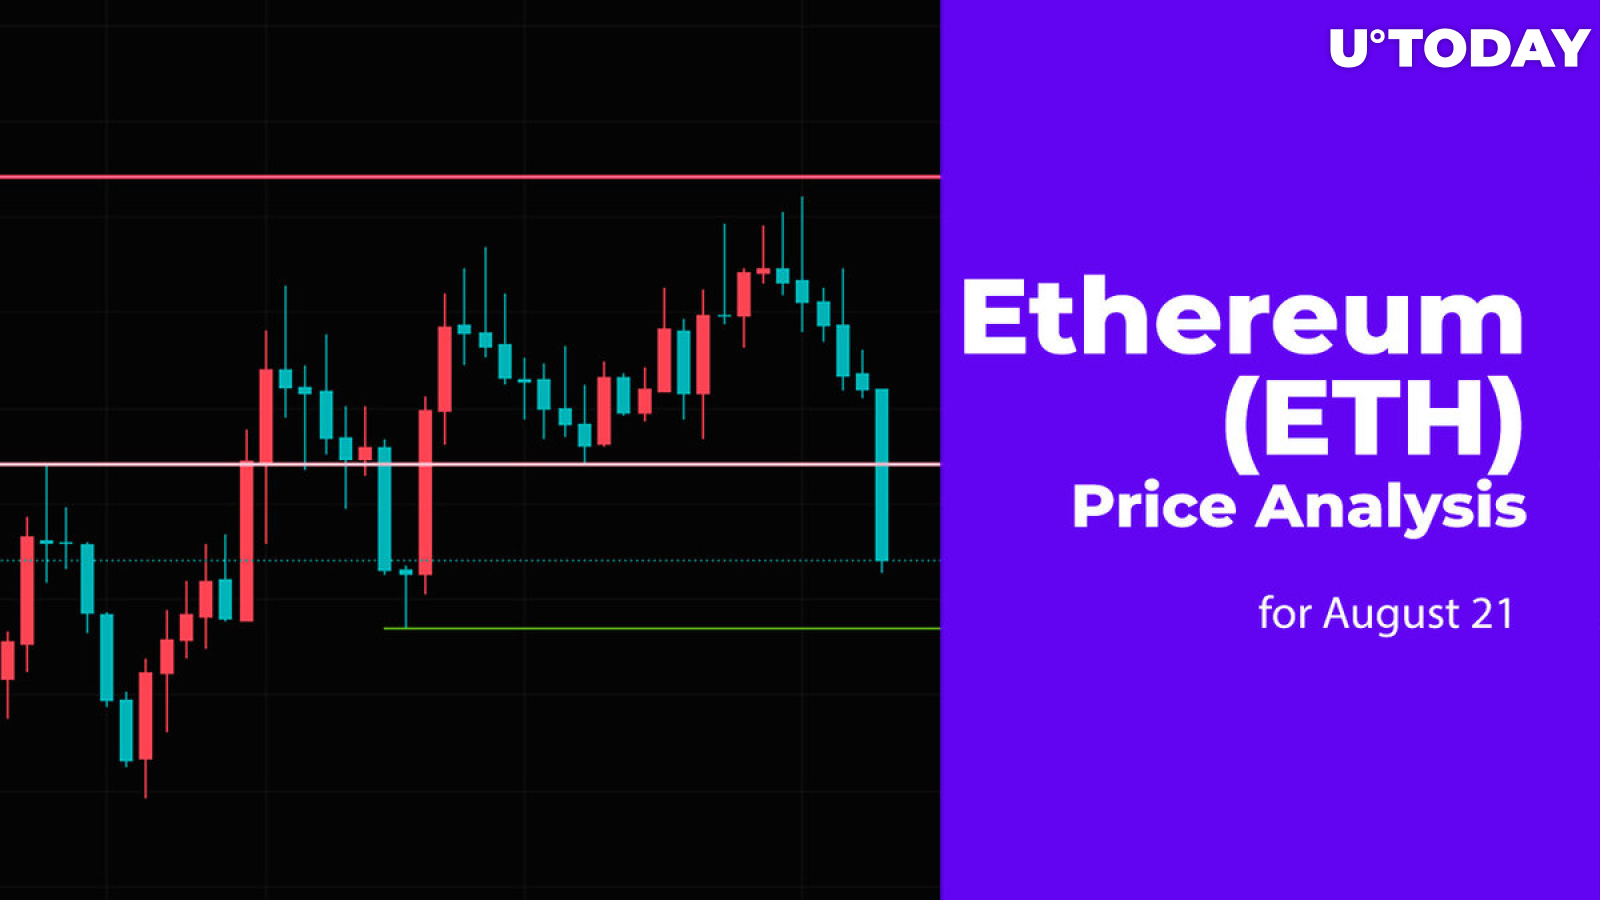 Ethereum (ETH) Price Analysis for August 21